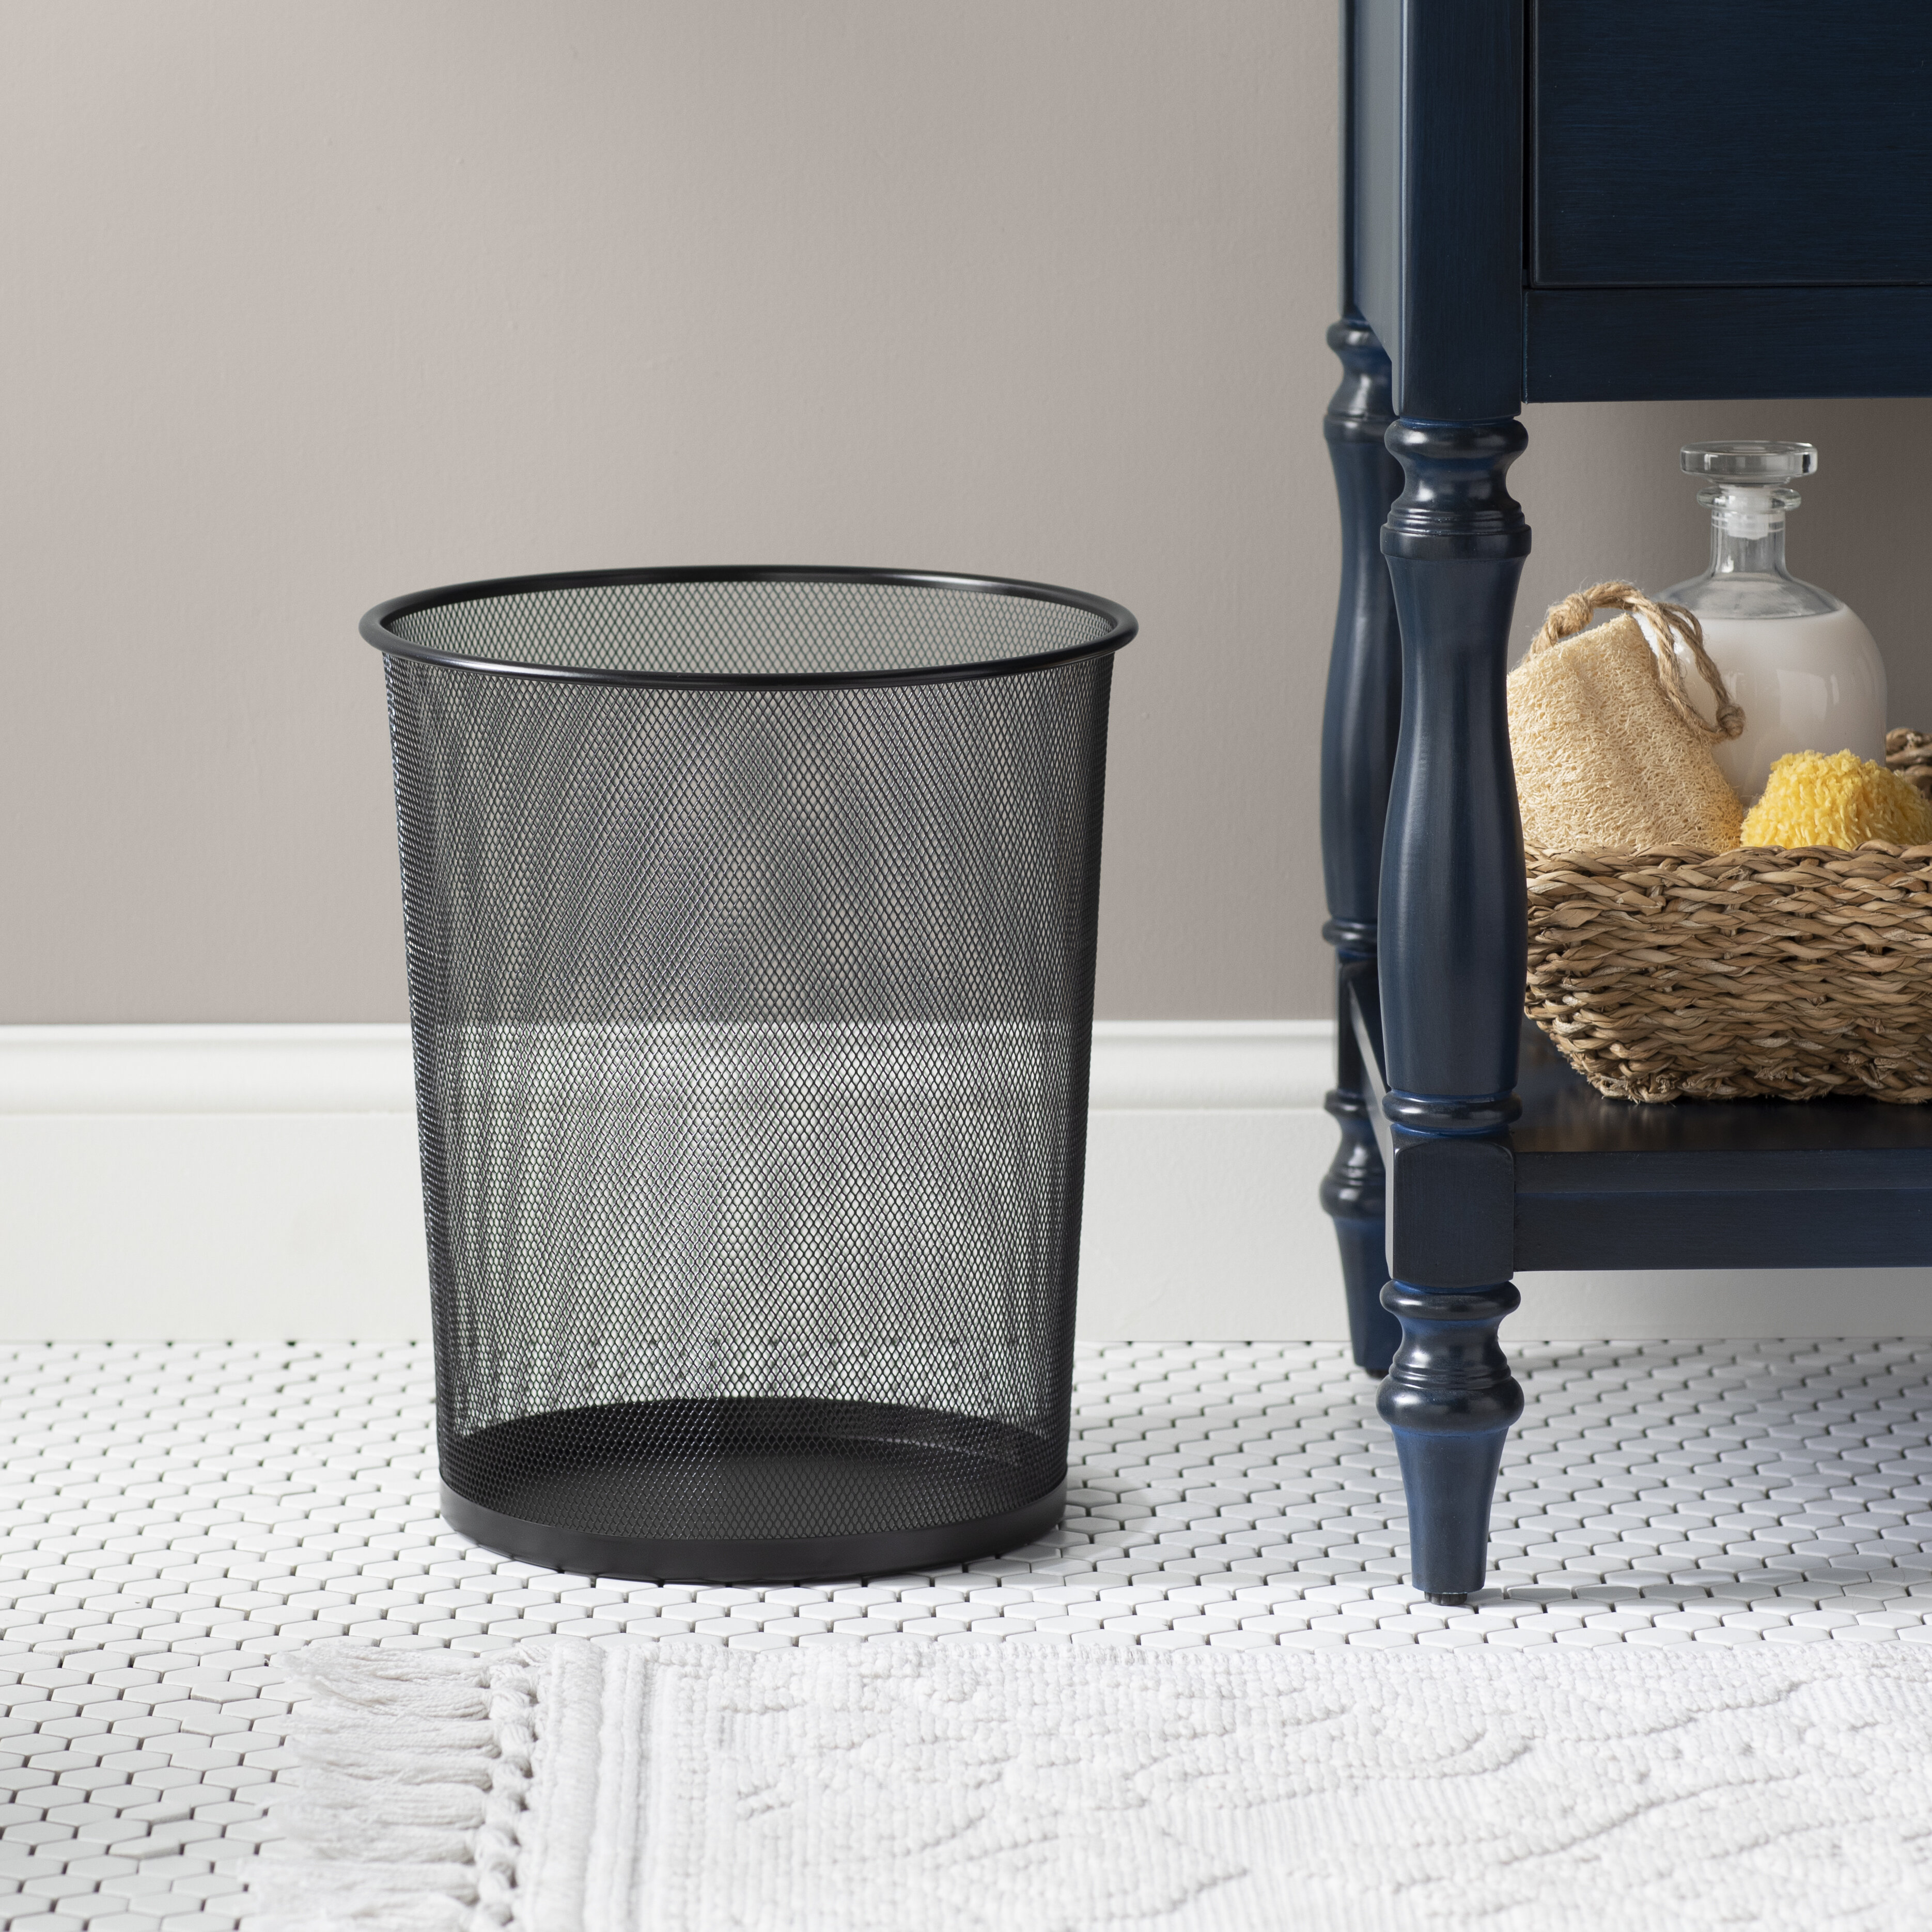 6L Trash Waste Bin in Brushed Nickel Garbage Any Room Basket Container Bags  Home